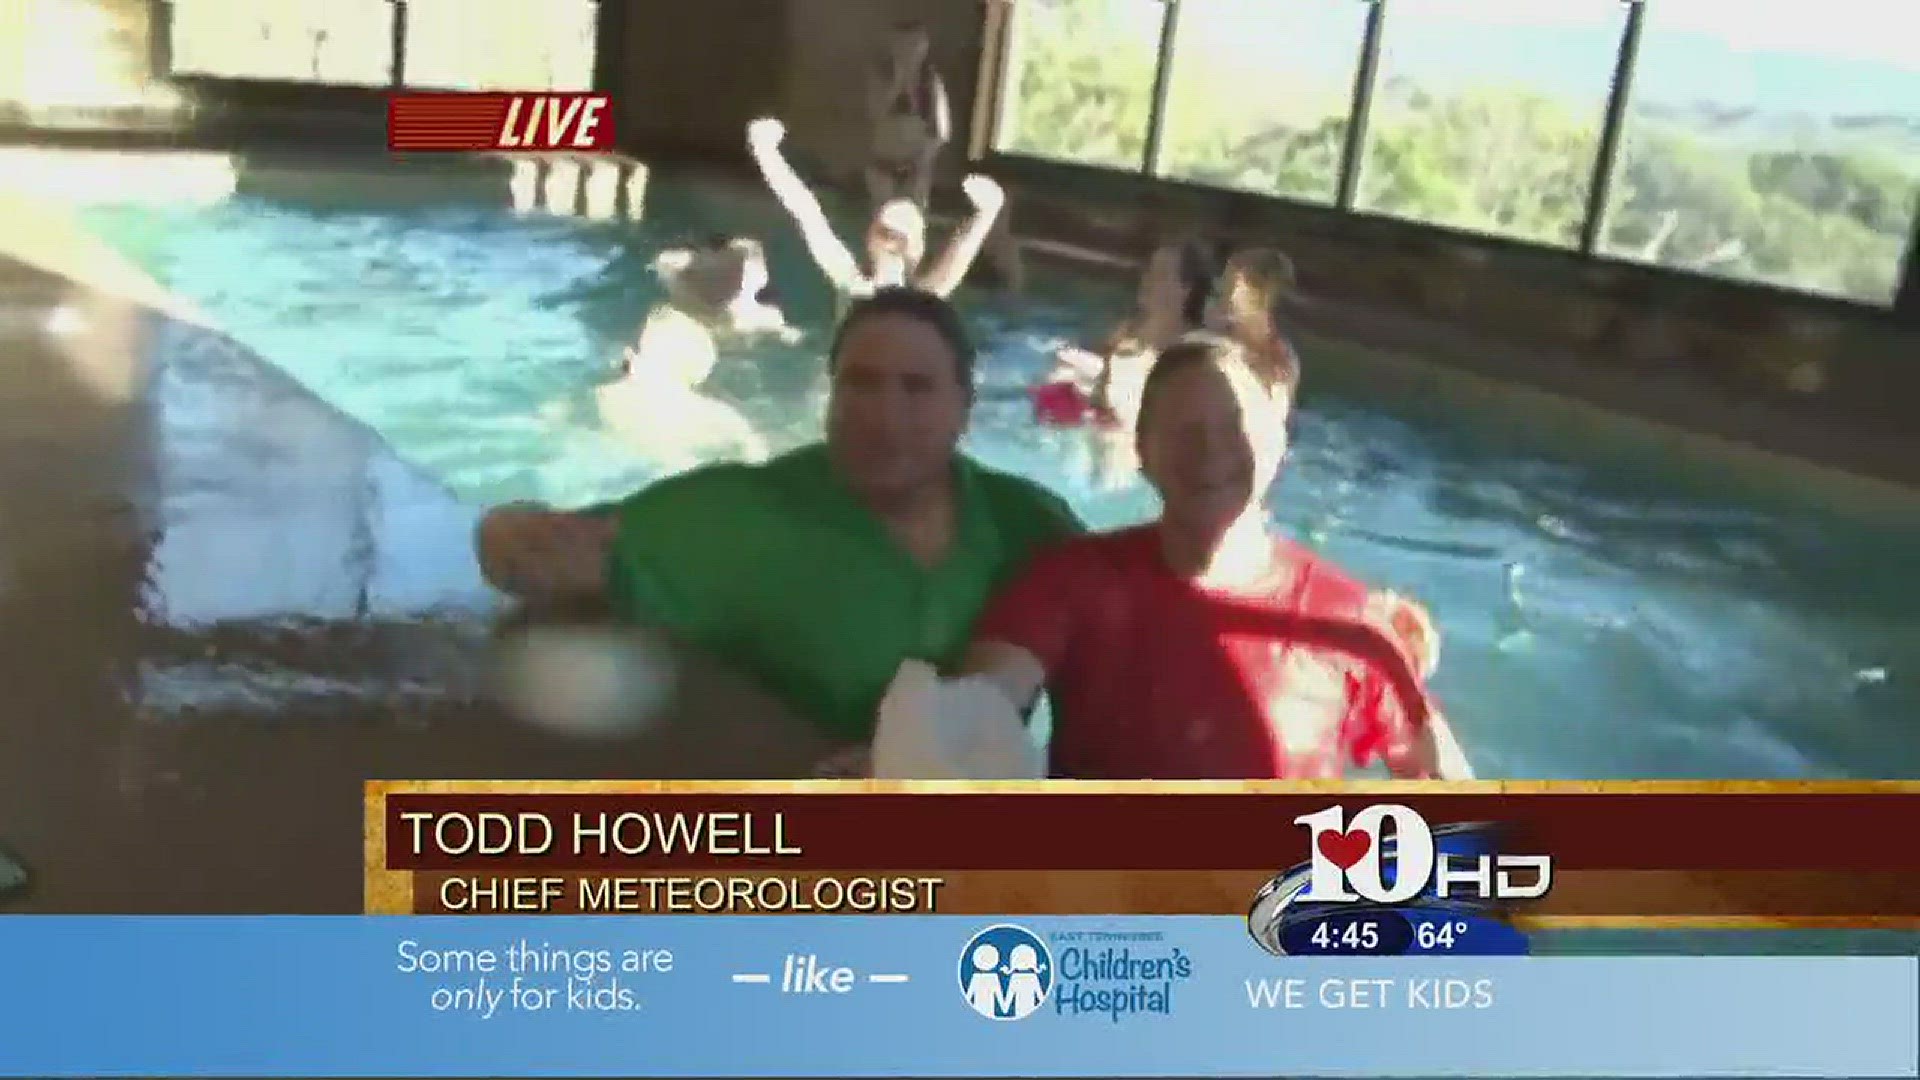 As Meteorologist Todd Howell was delivering the forecast in a swimming pool, Russell Biven surprised him by jumping in with him!